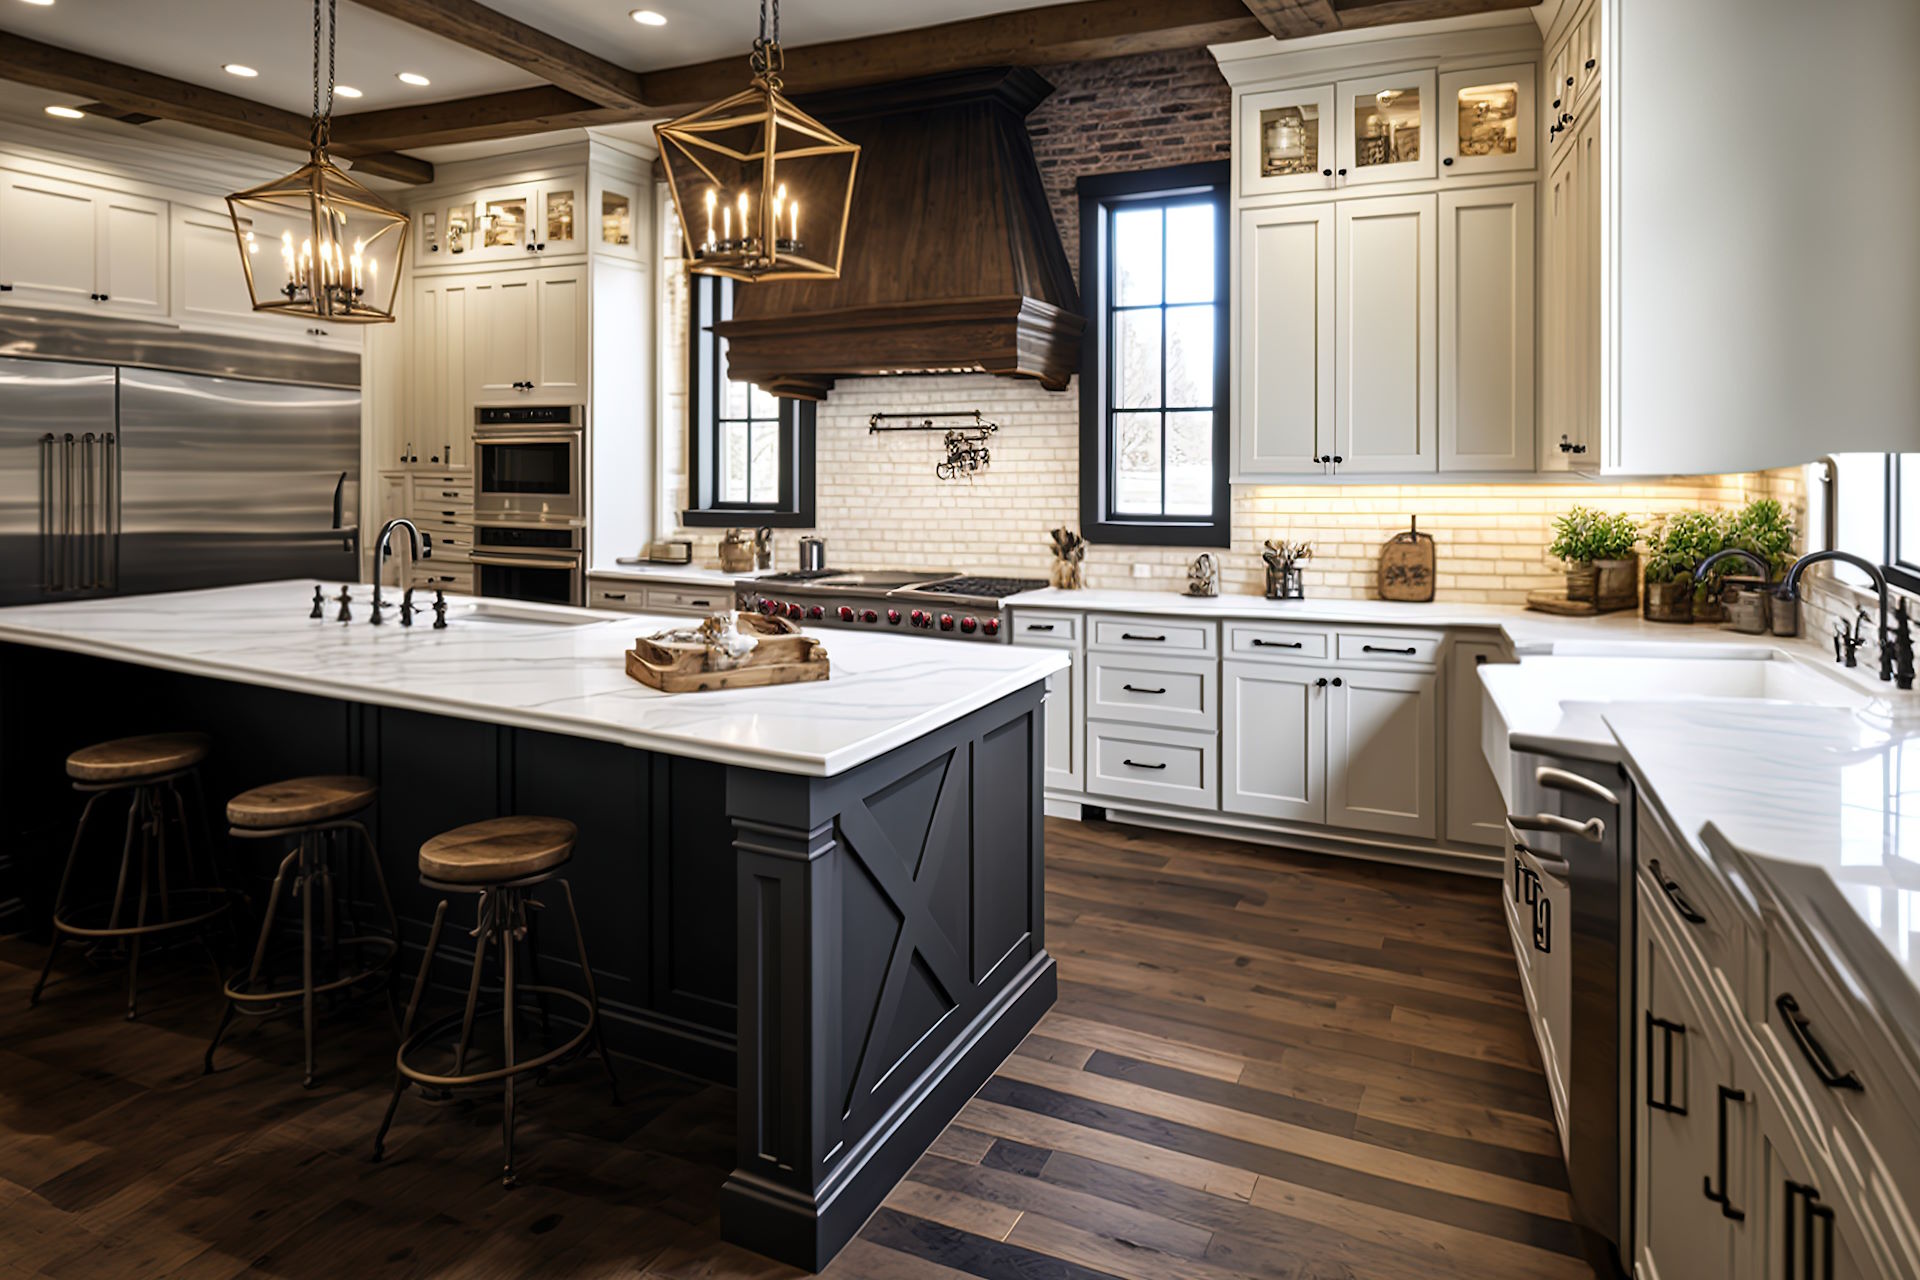 From practical to gourmet, Sugar Creek Homes can build the home and kitchen of your dreams.